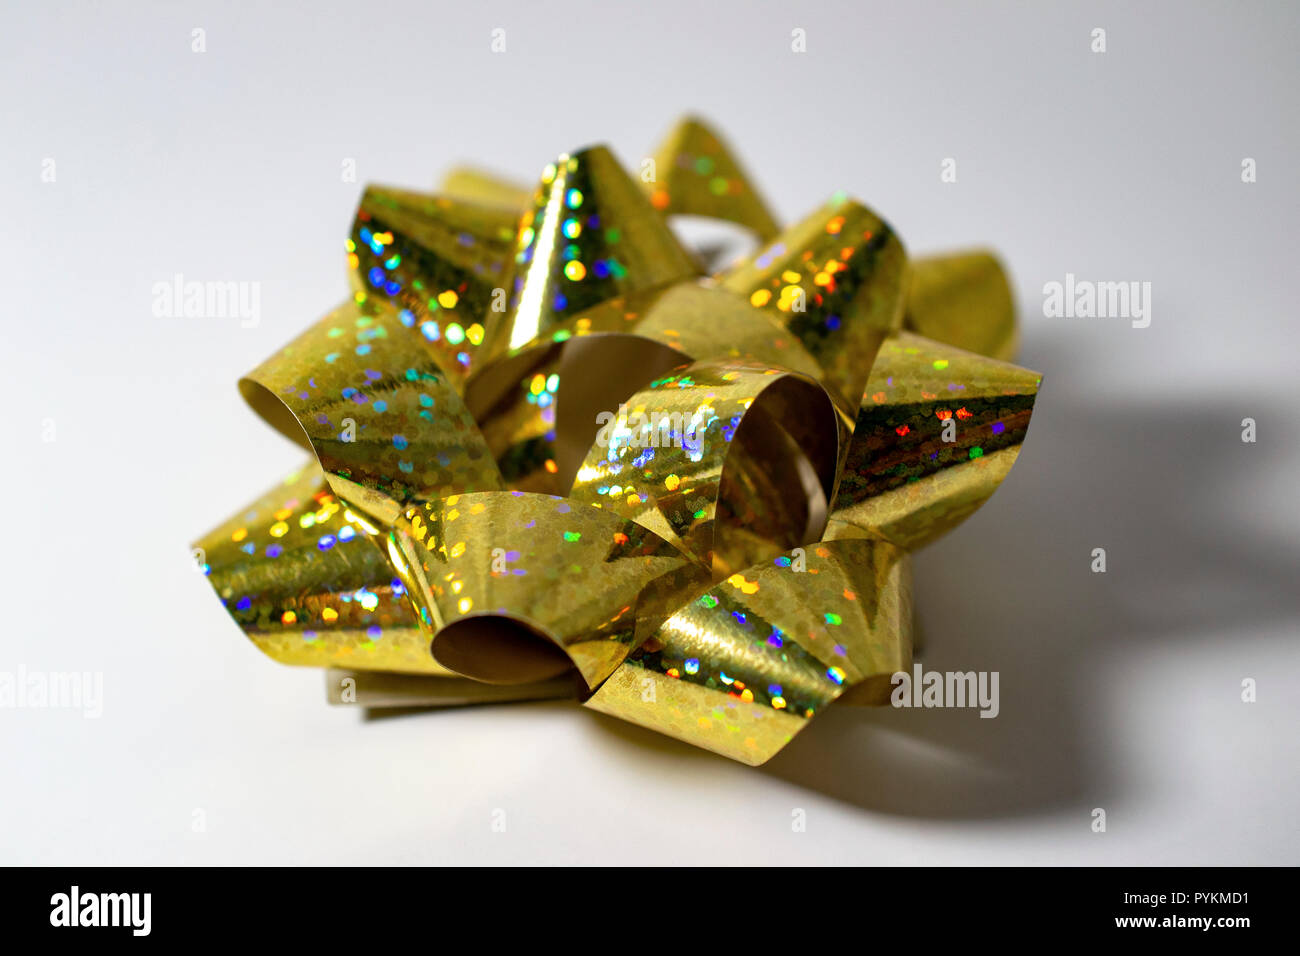 1 Single Sparkly Gold Golden Satin Bow Ribbon Christmas Holiday Light Background. Room for Copy. Stock Photo